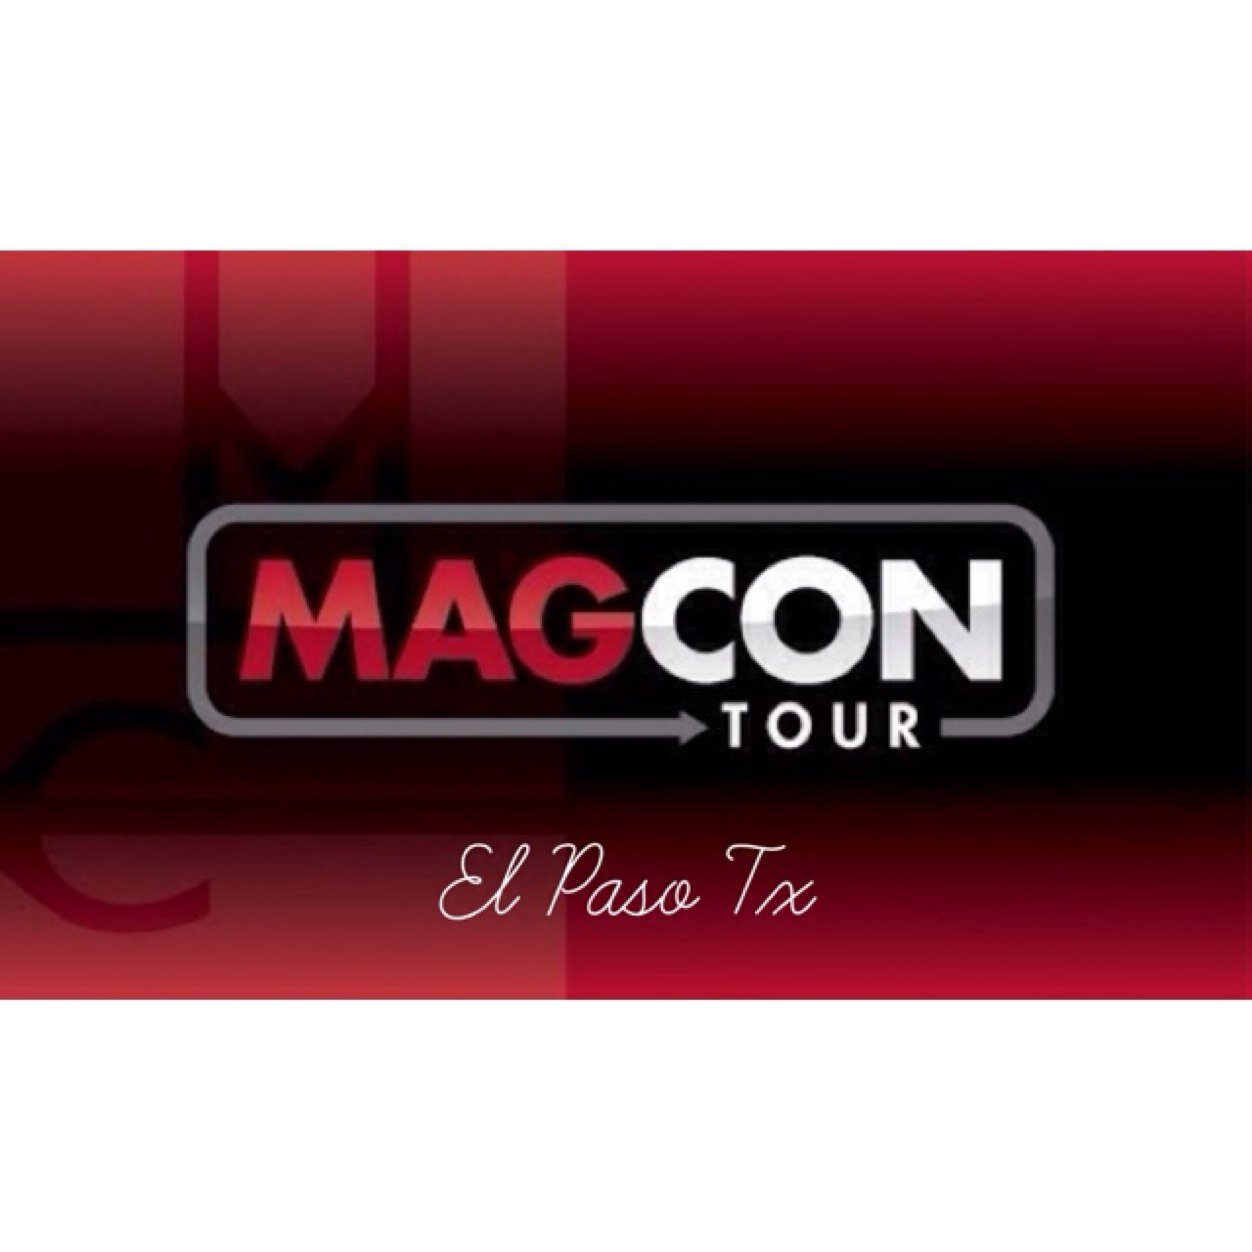 Please help us Bring Magcon Tour To El Paso Texas! Every follow makes a difference. http://t.co/04CokEkjM0